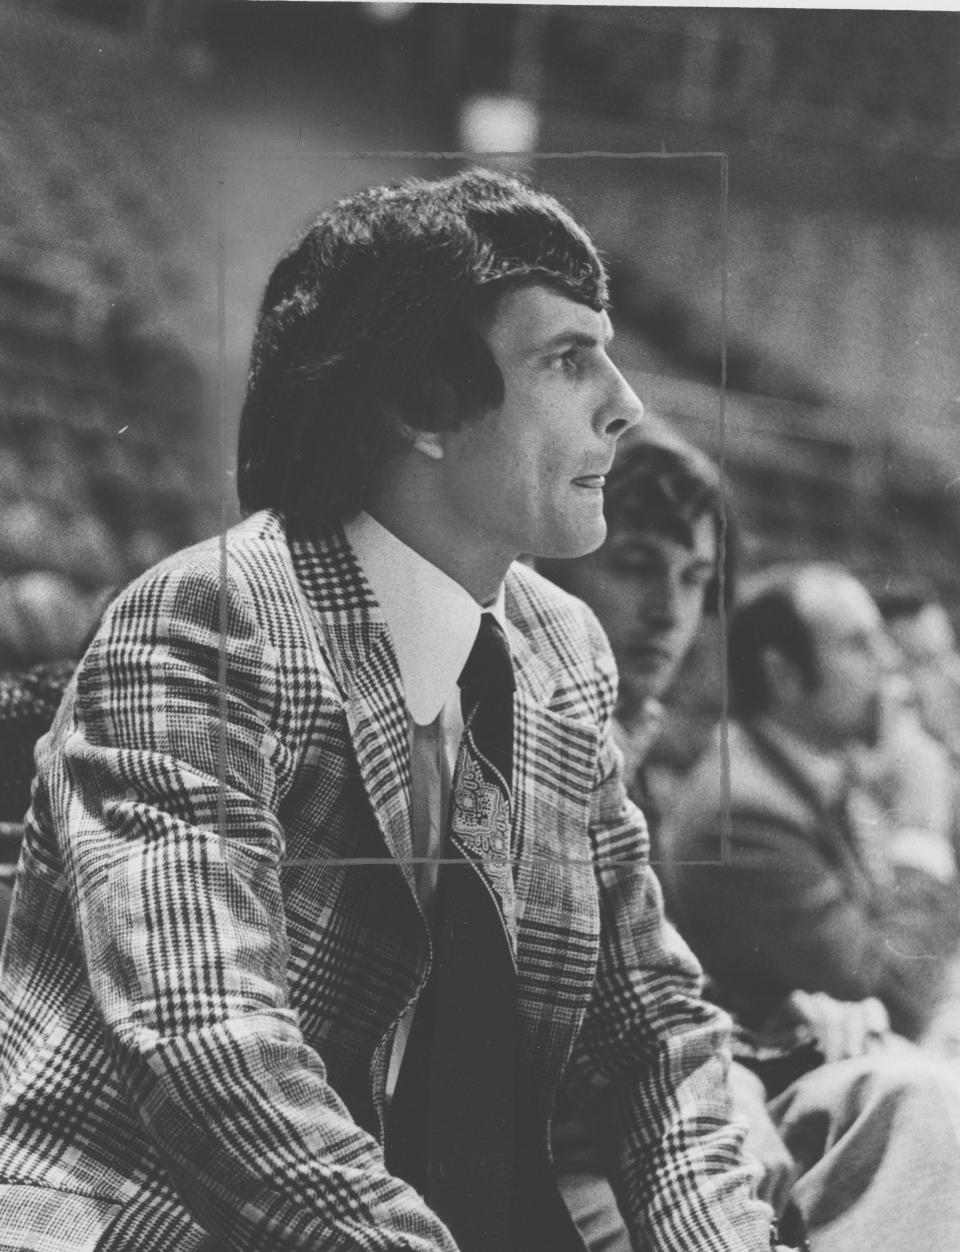 After his playing days, Johnny Egan coached the Houston Rockets from 1972-76.